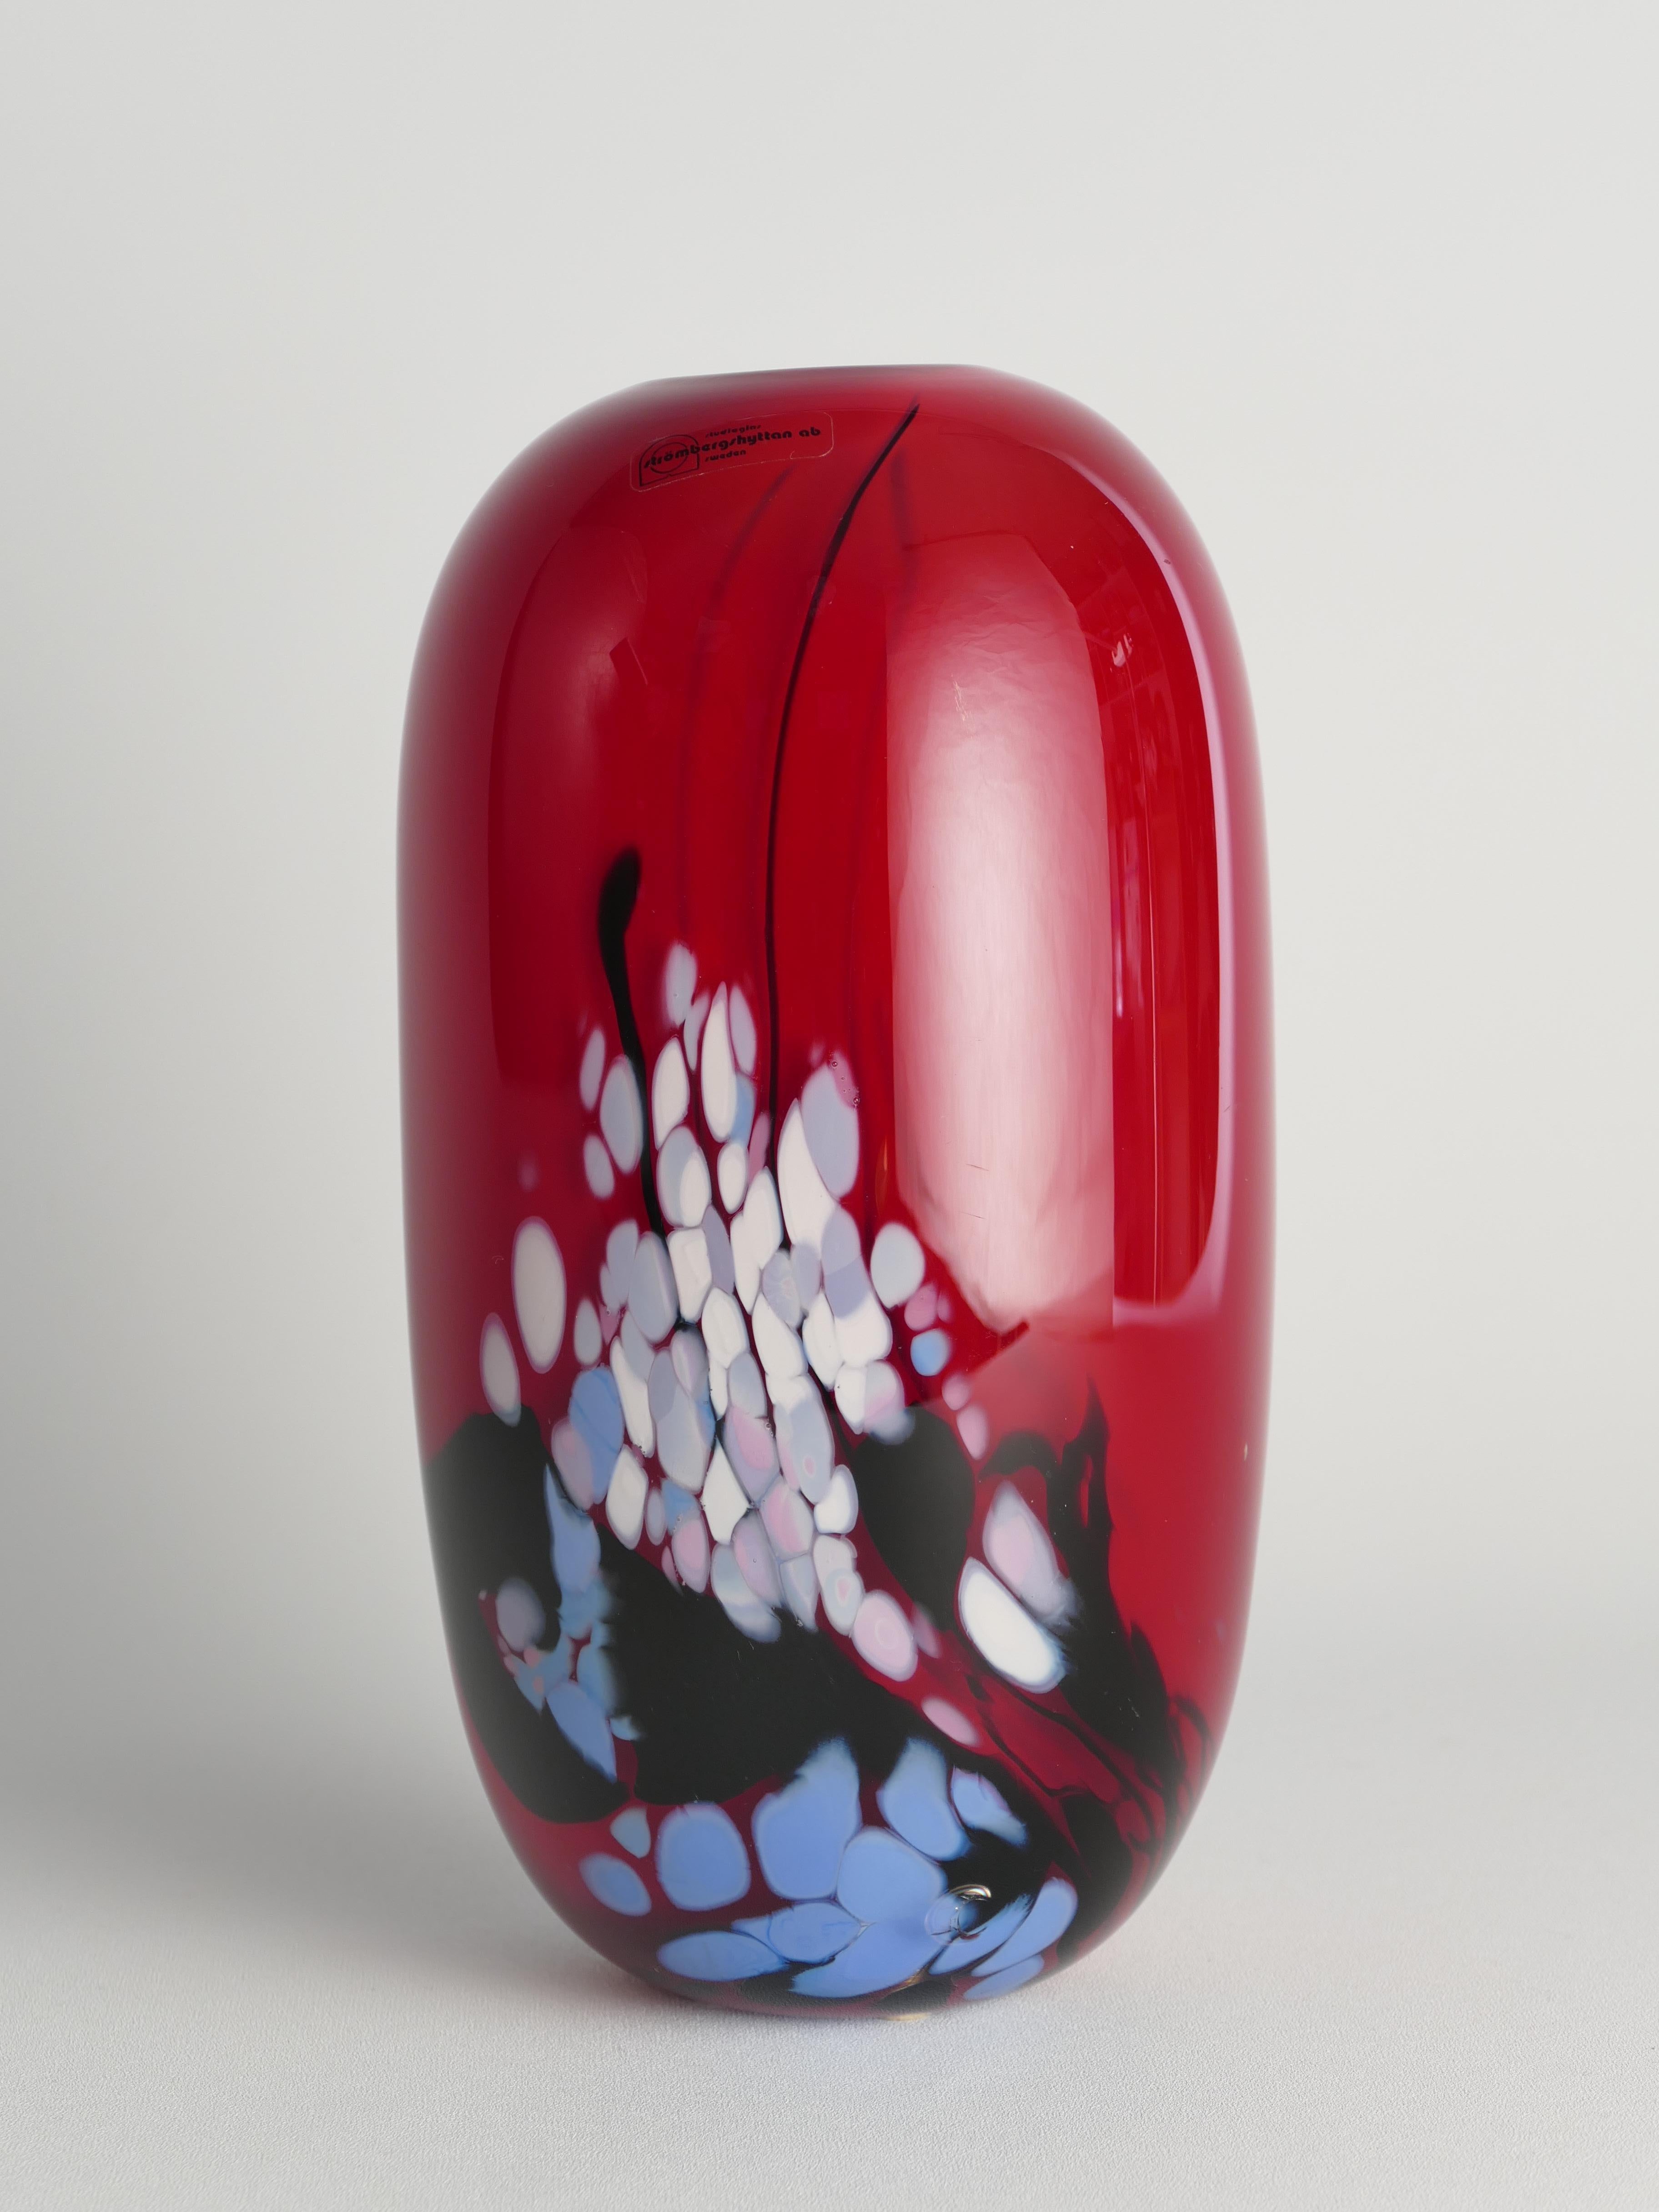 Unique Cherry Red Art Glass Vase by Mikael Axenbrant, Sweden 1990 For Sale 1